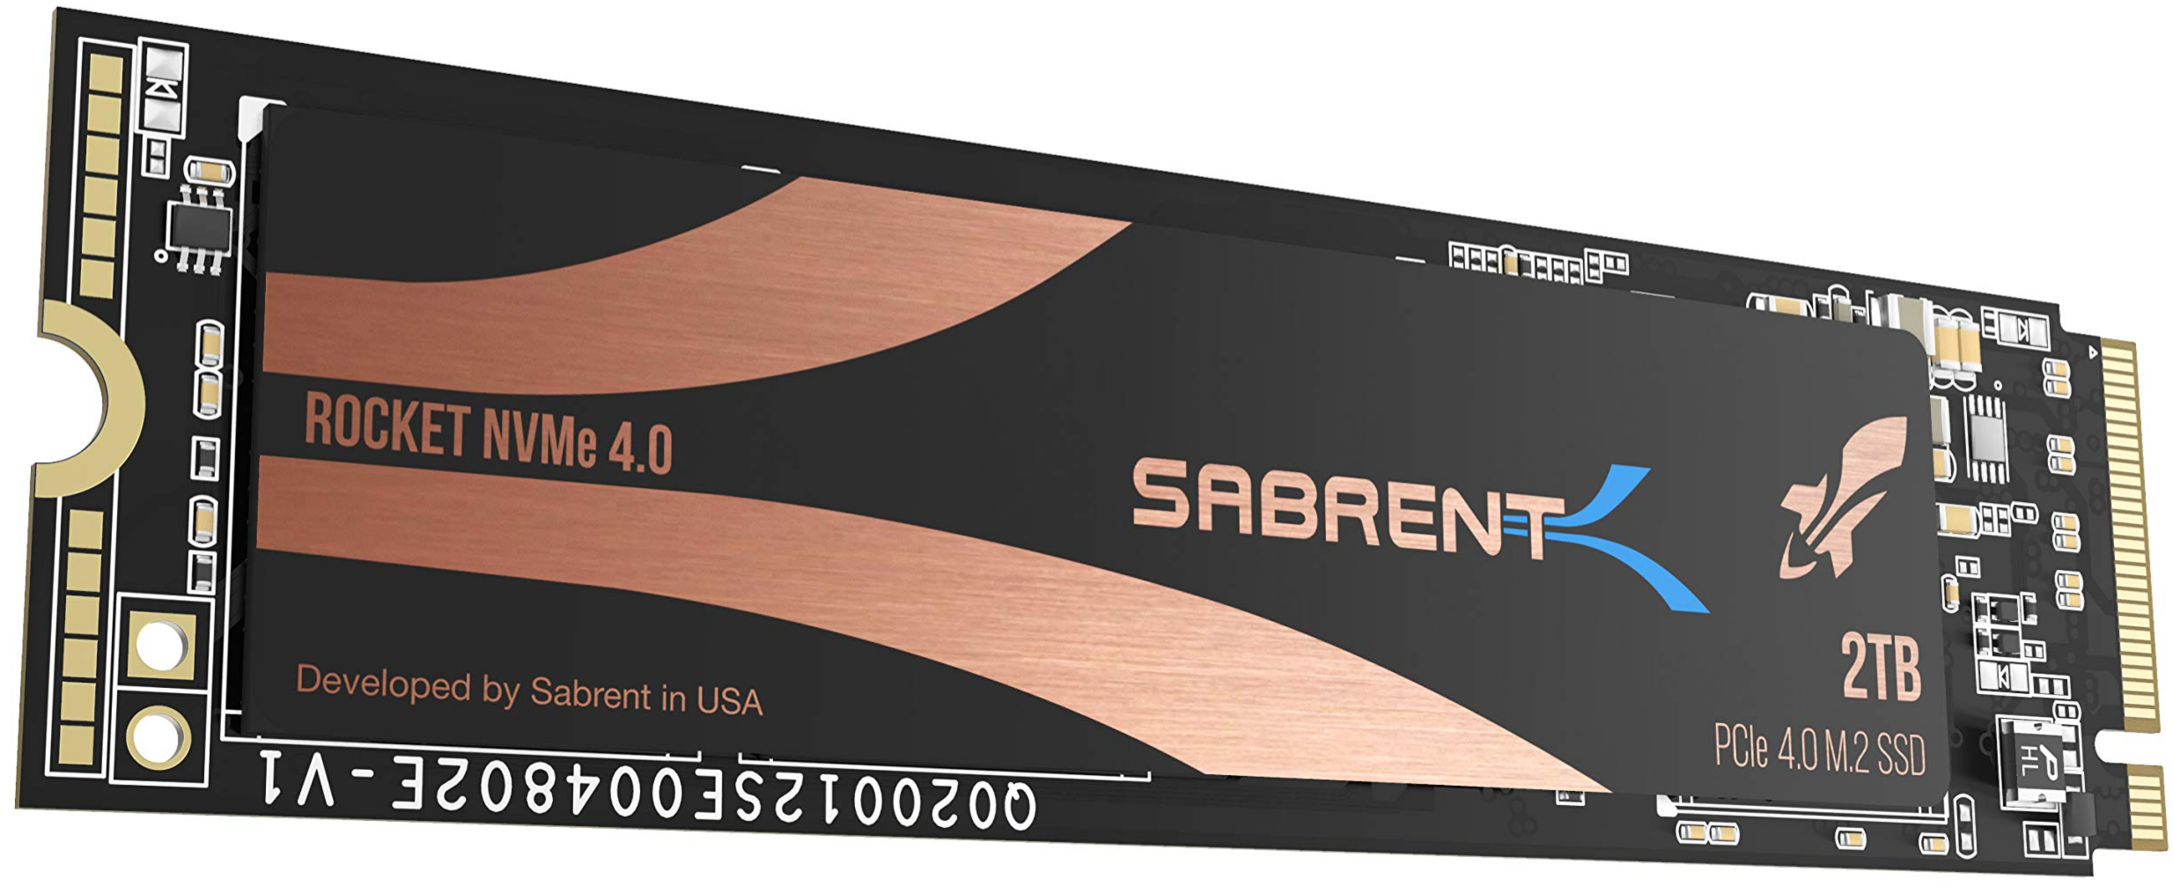 Limited-time deal: SABRENT 2TB Rocket Nvme PCIe 4.0 M.2 2280 Internal SSD Maximum Performance Solid State Drive (Latest Version) (SB-ROCKET-NVMe4-2TB). - $119.99 at Amazon